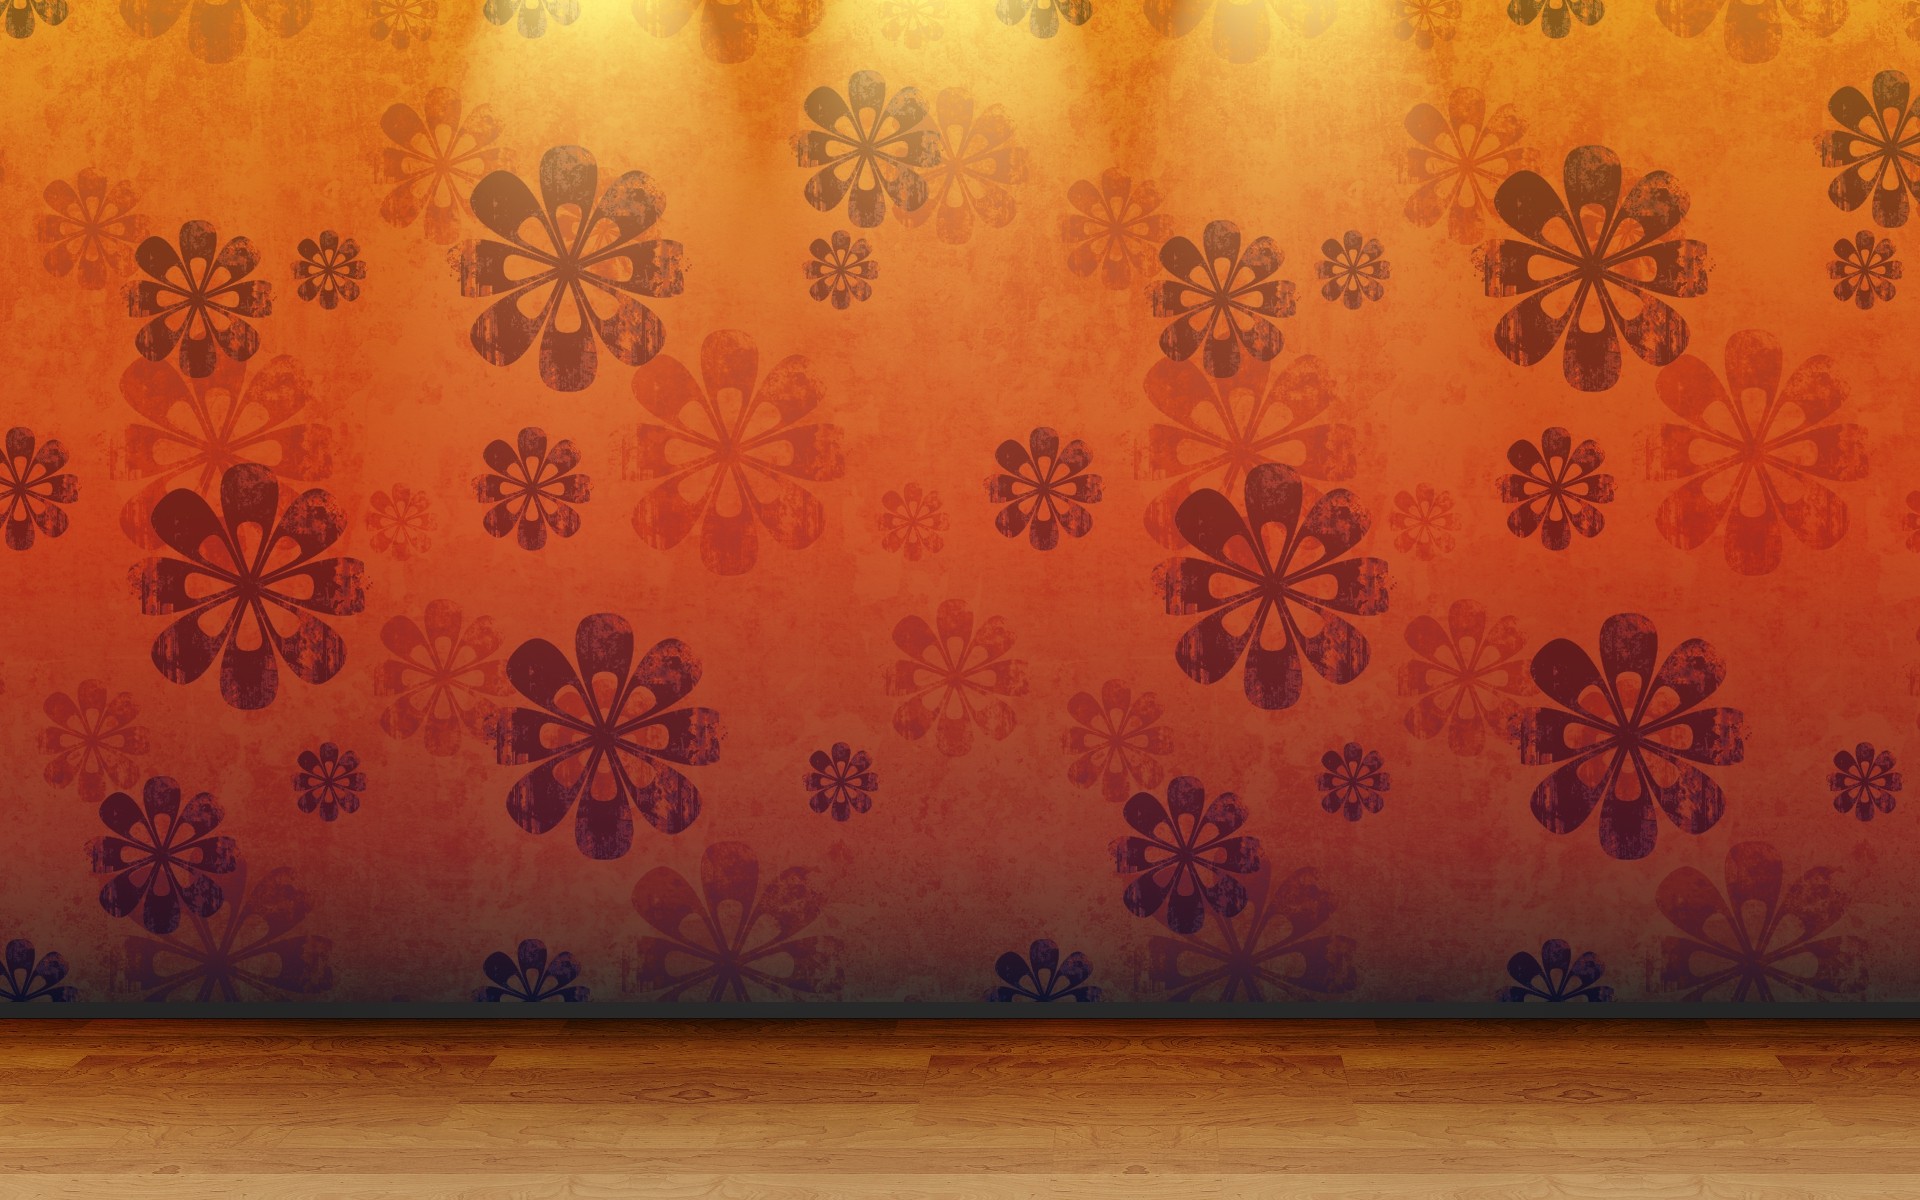 Wood floral pattern on wall backgrounds